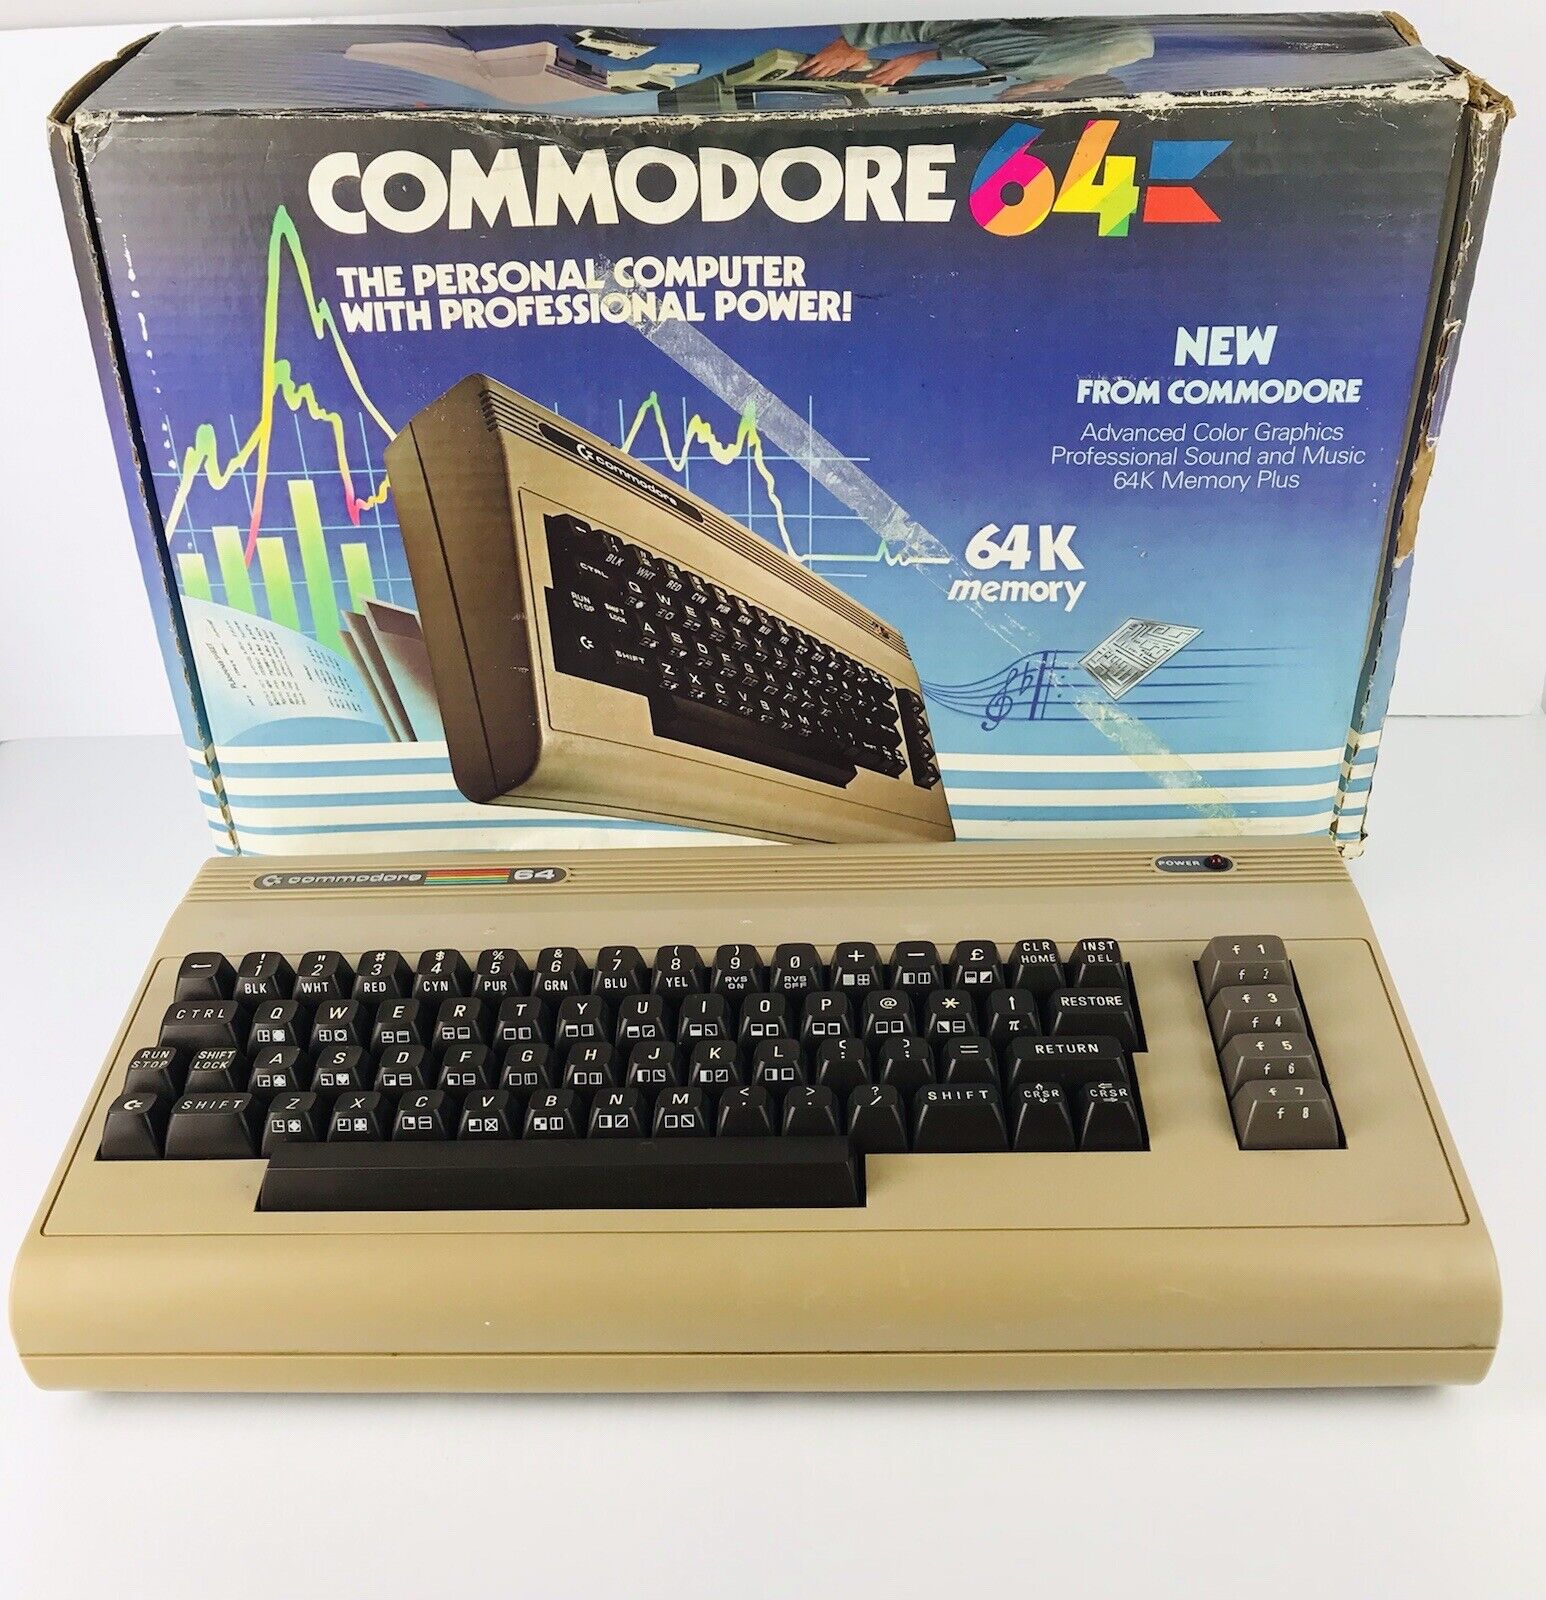 Commodore 64 - Computer In Box No Power Supply - UNTESTED AS-IS  - Authentic